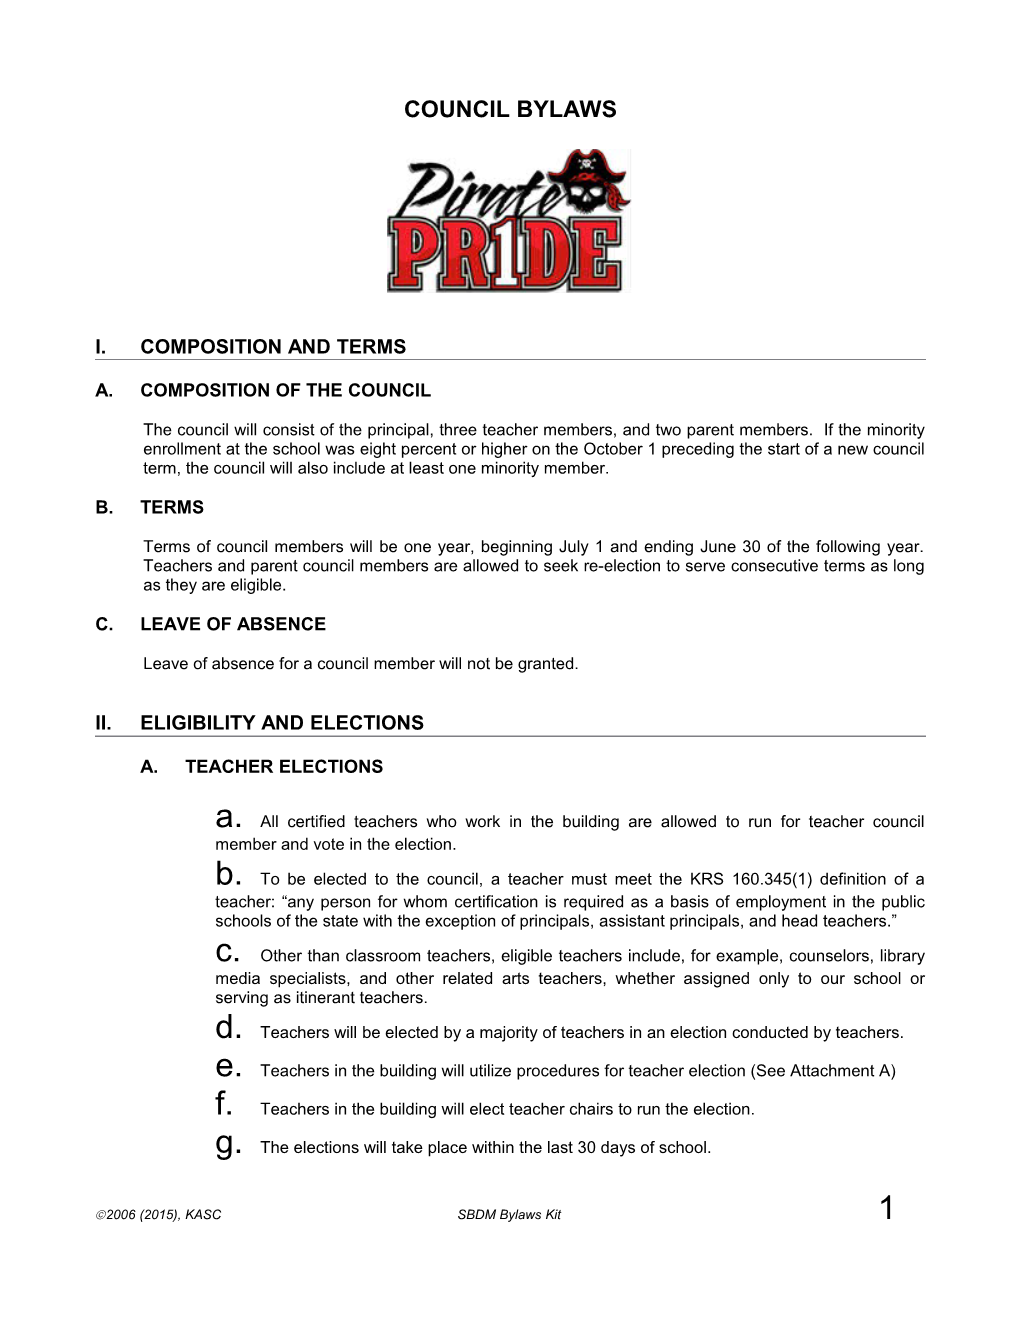 Proposed Revised Bylaws: THIRD DRAFT 2/25/02